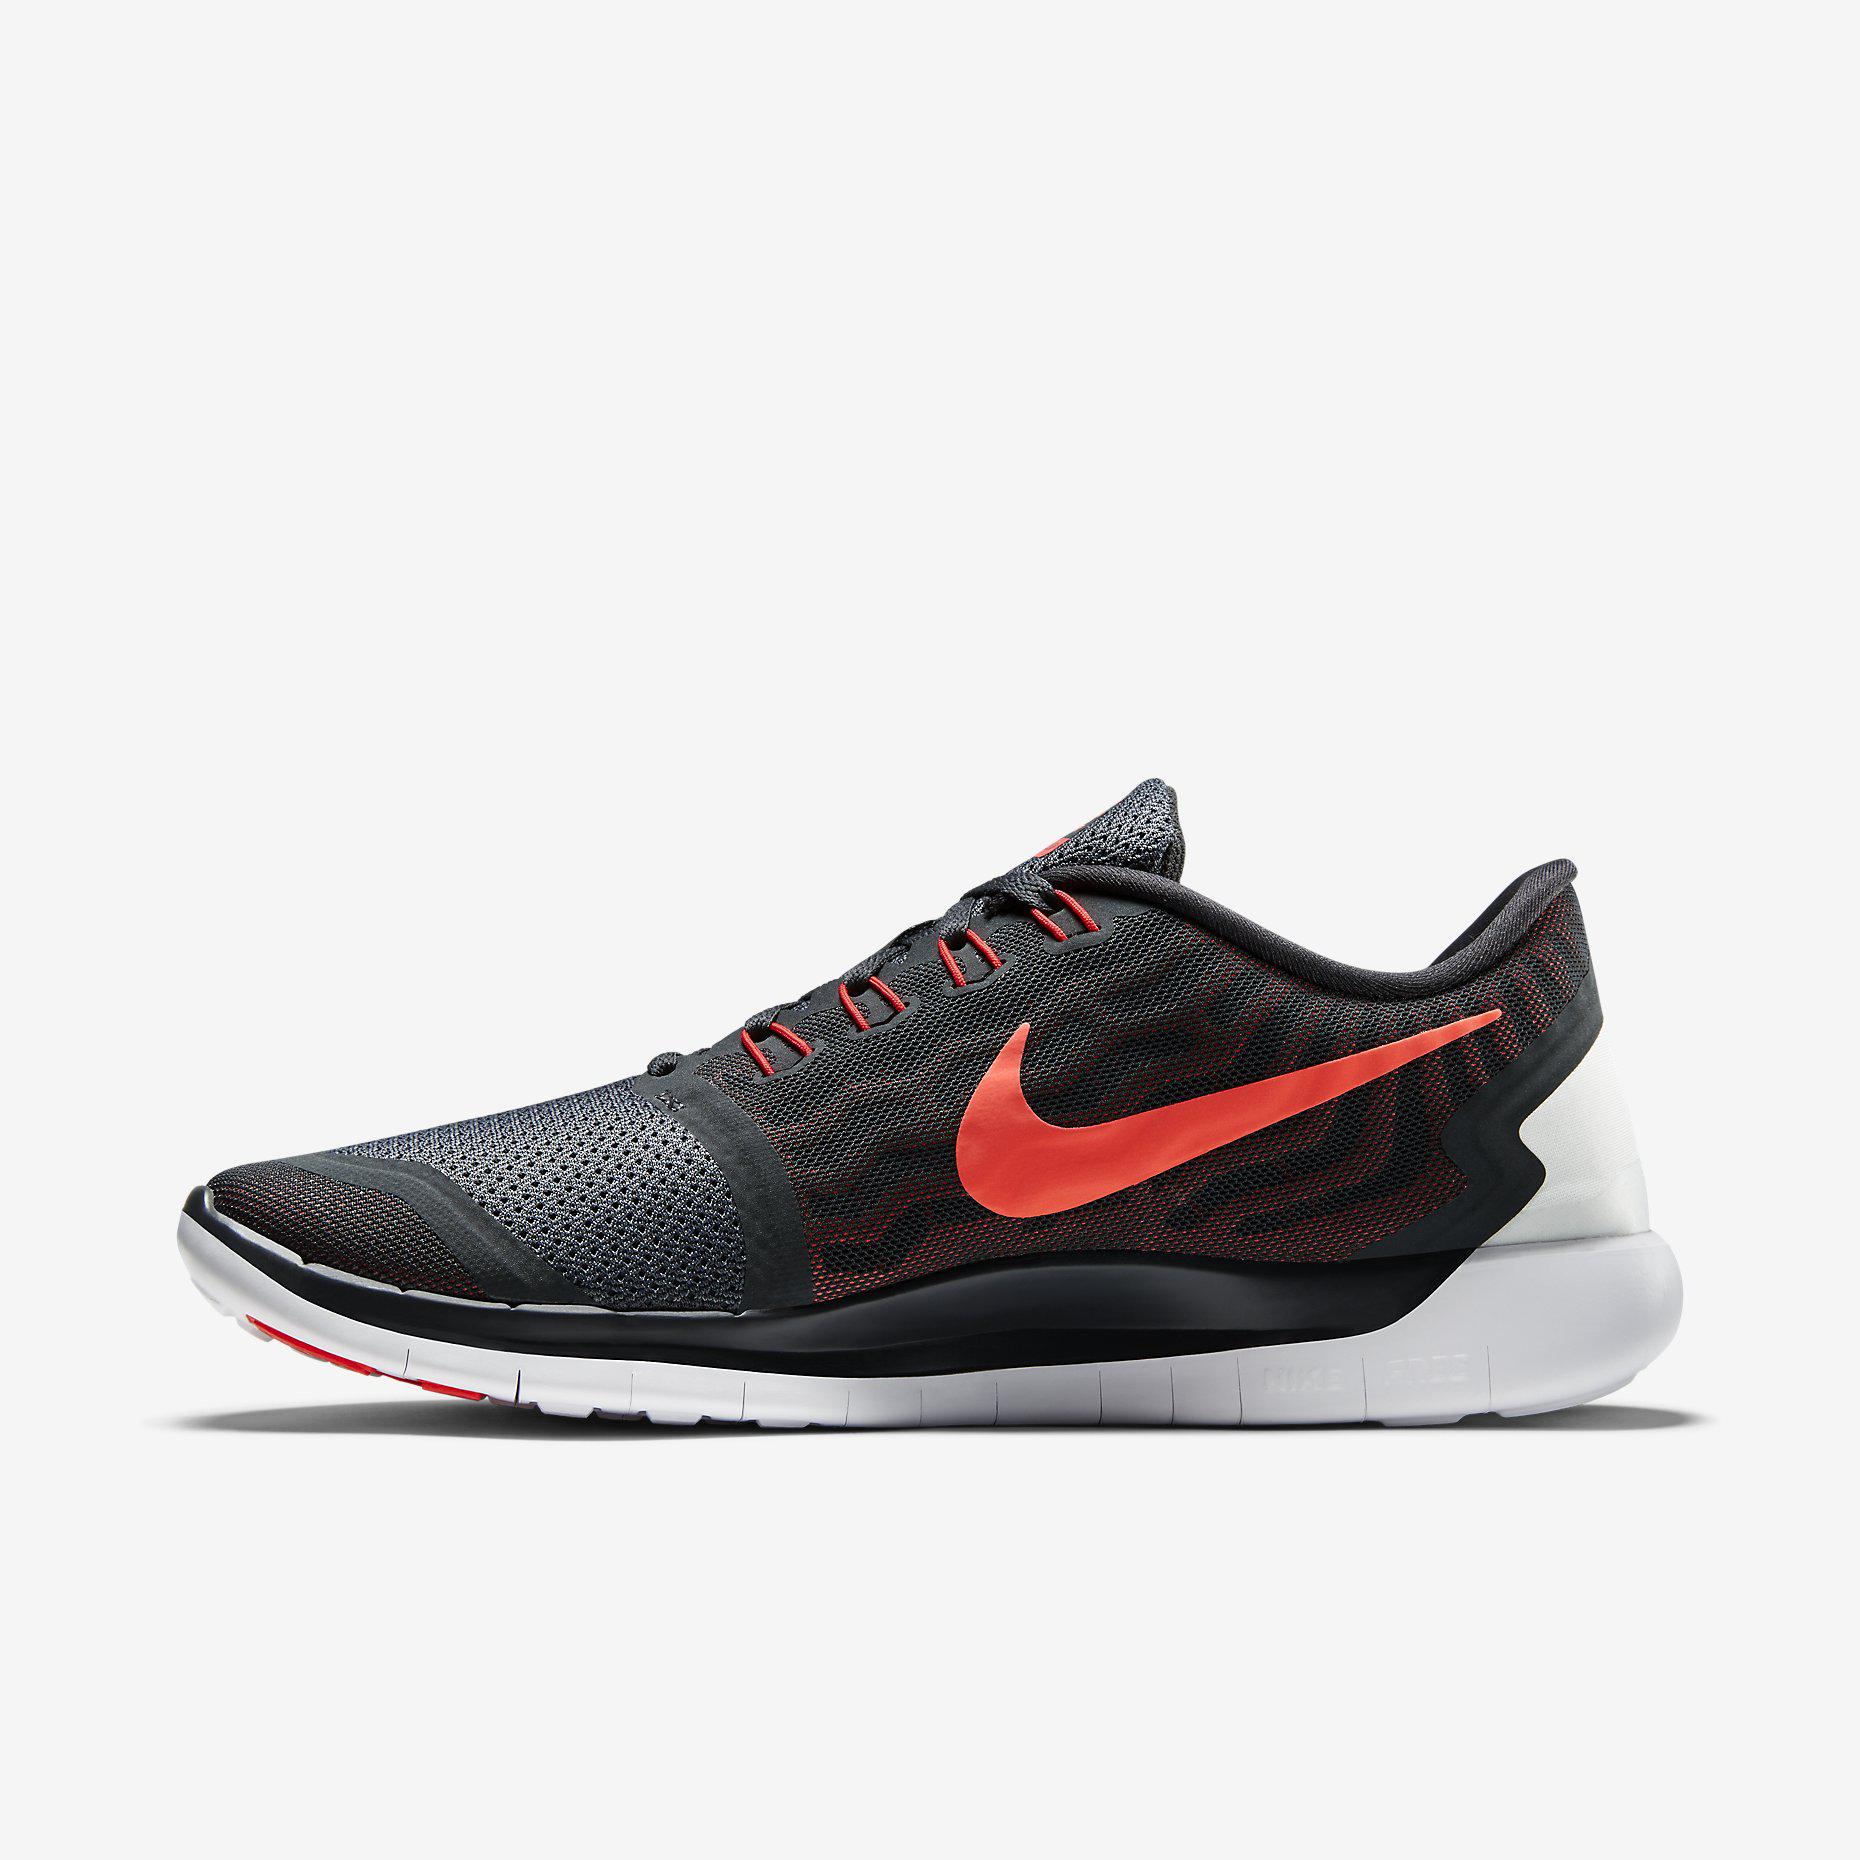 Nike Mens Free 5.0+ Running Shoes - Anthracite/Bright Crimson ...